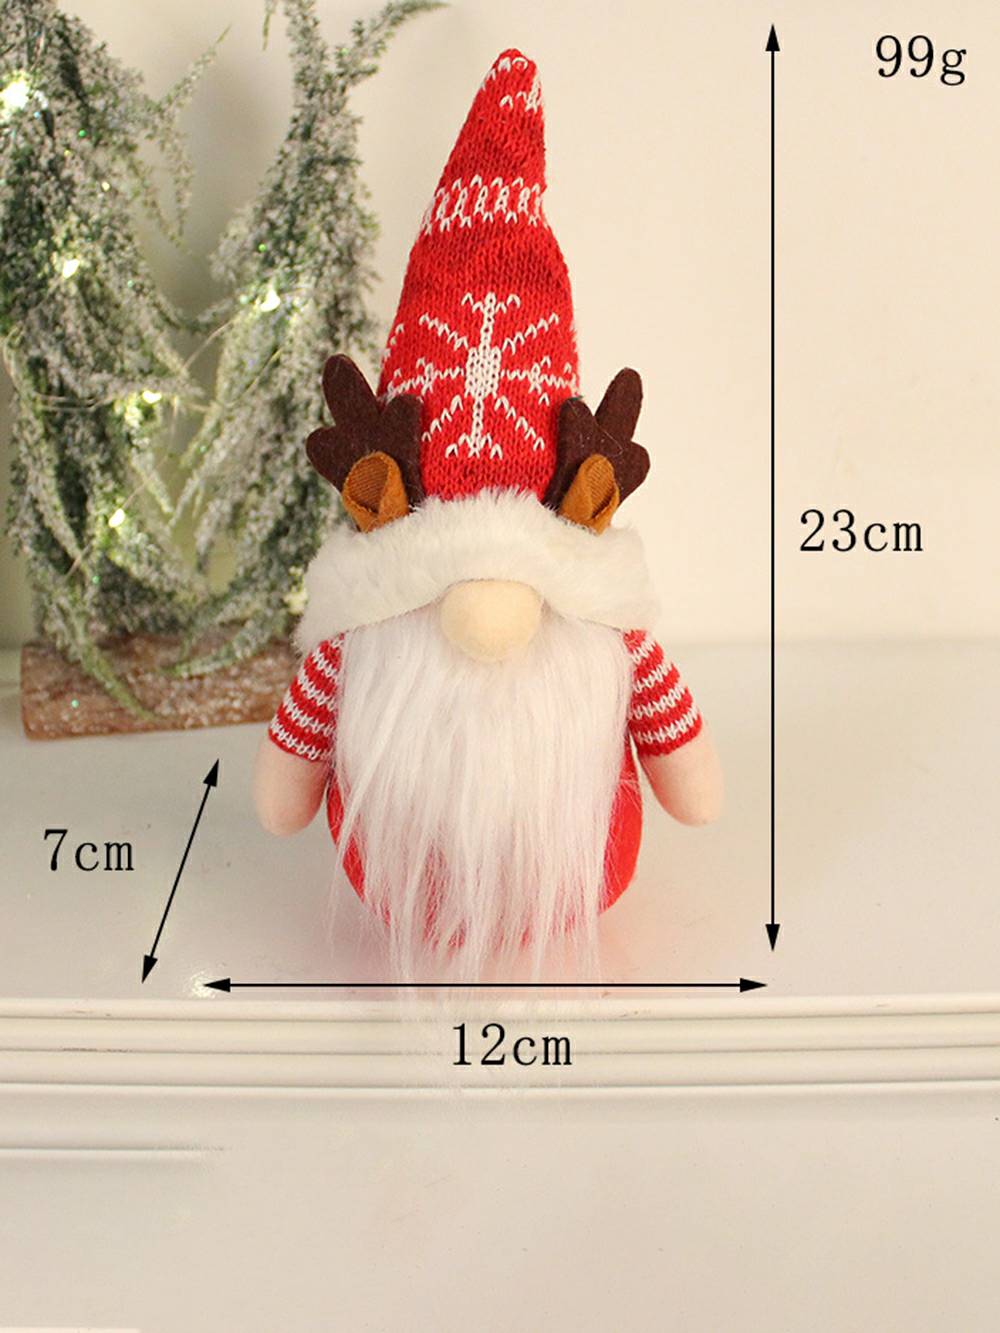 Christmas Plush Elf Decor: Braided & Bearded Couple Doll with Antlers